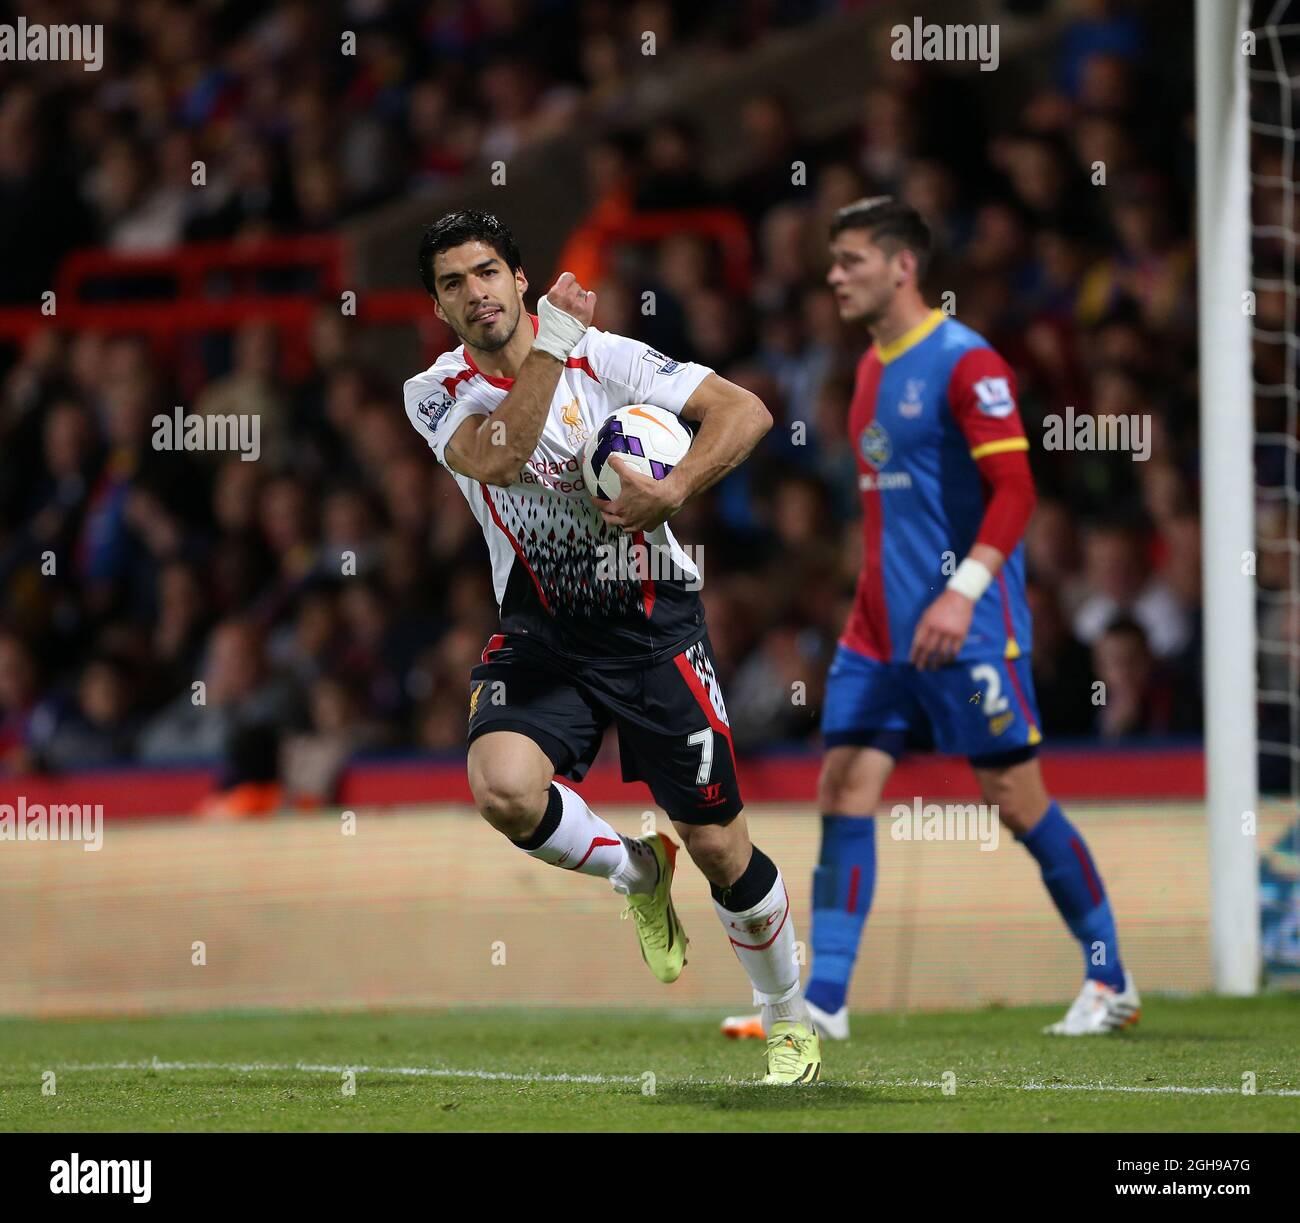 Liverpool's Luis Suarez celebrates scoring his sides third goal during the Barclays Premier League match between Crystal Palace and Liverpool held at Selhurst Park in London, UK on May 05, 2014. Stock Photo